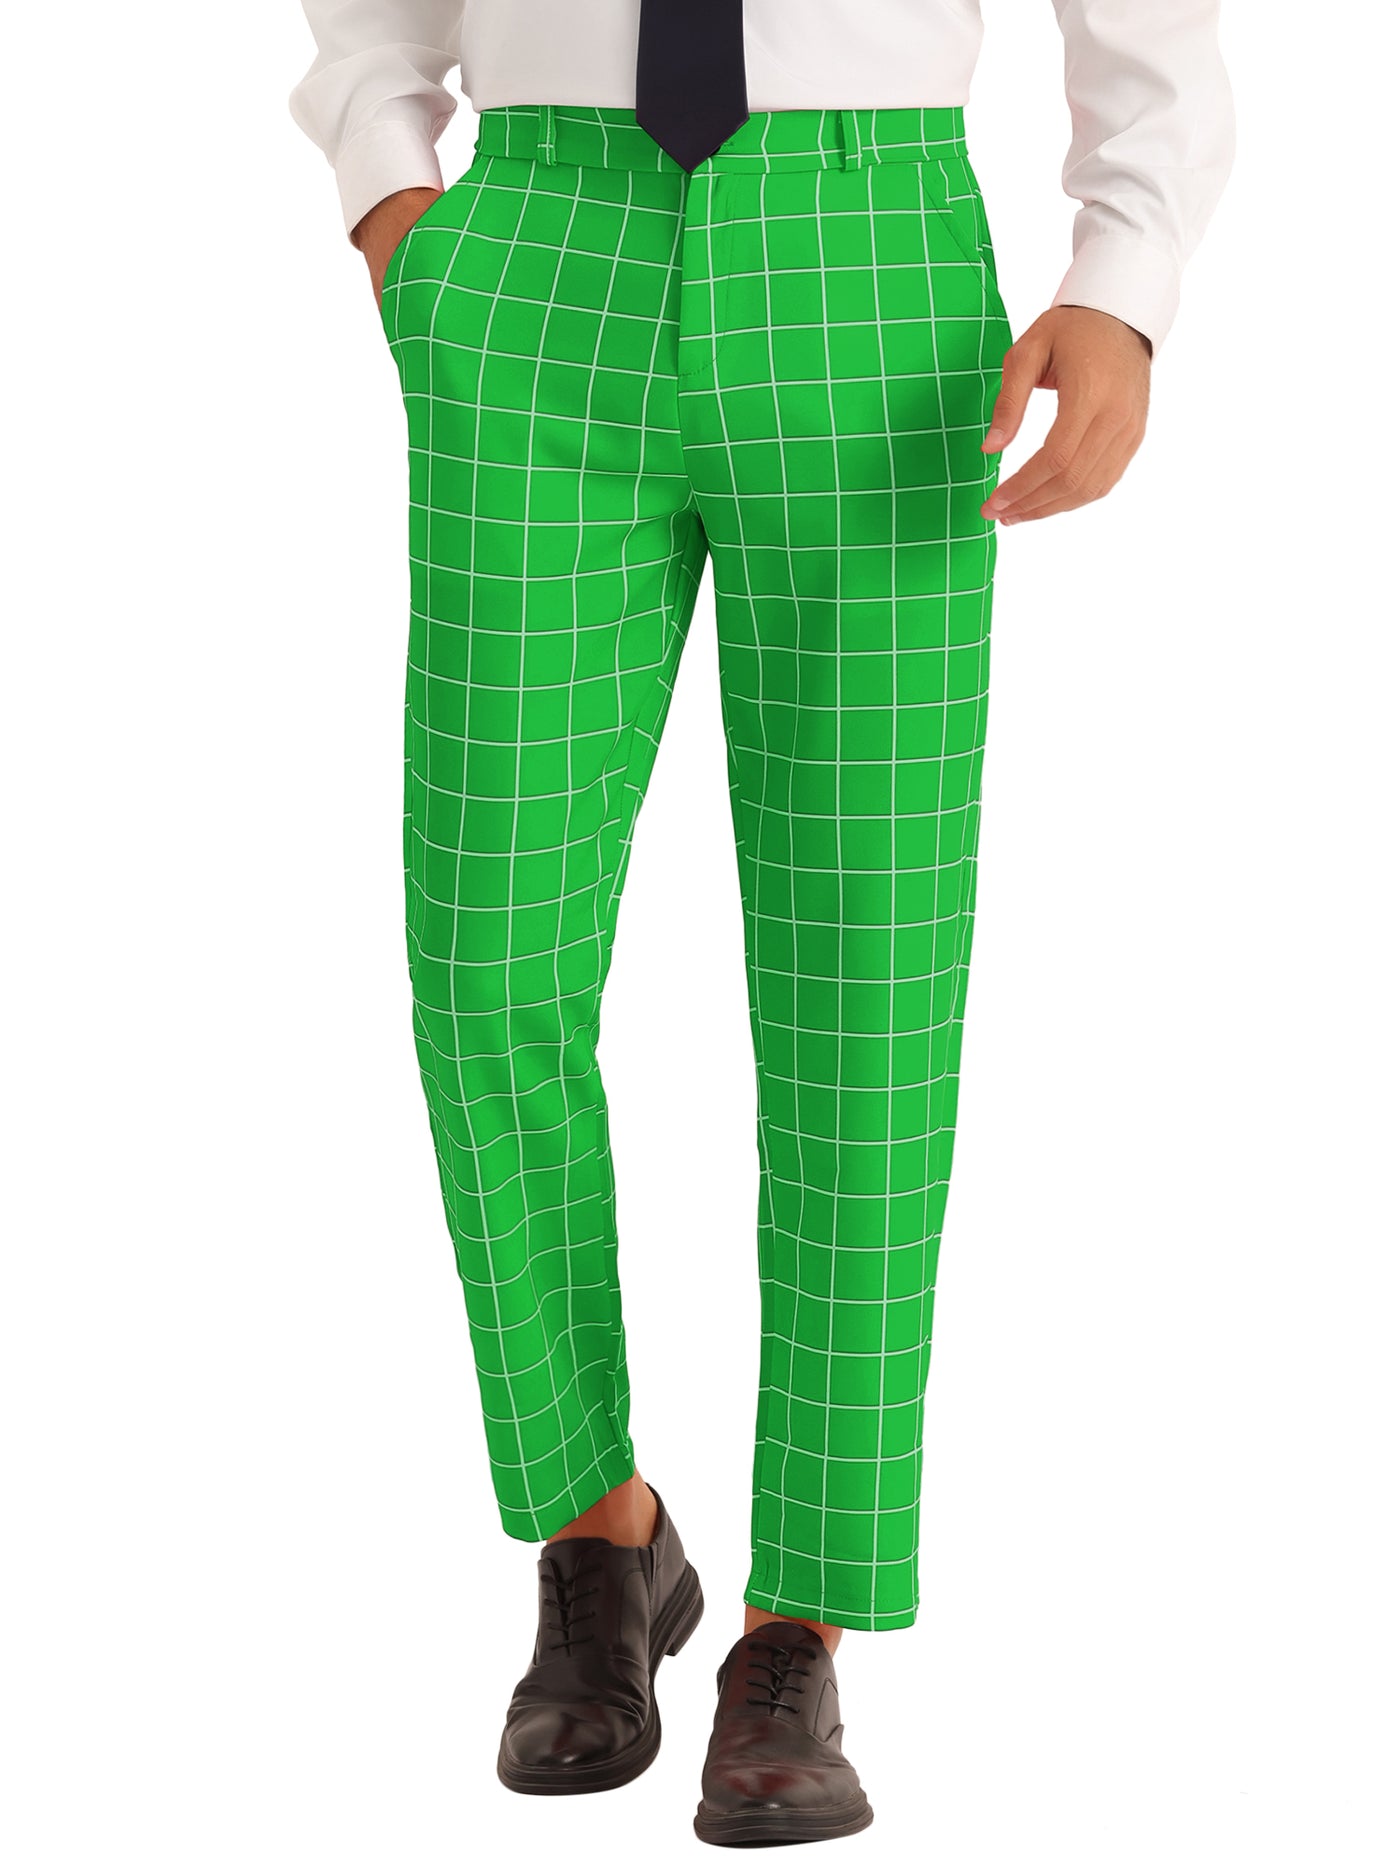 Bublédon Plaid Pants for Men's Slim Fit Business Checked Printed Dress Trousers